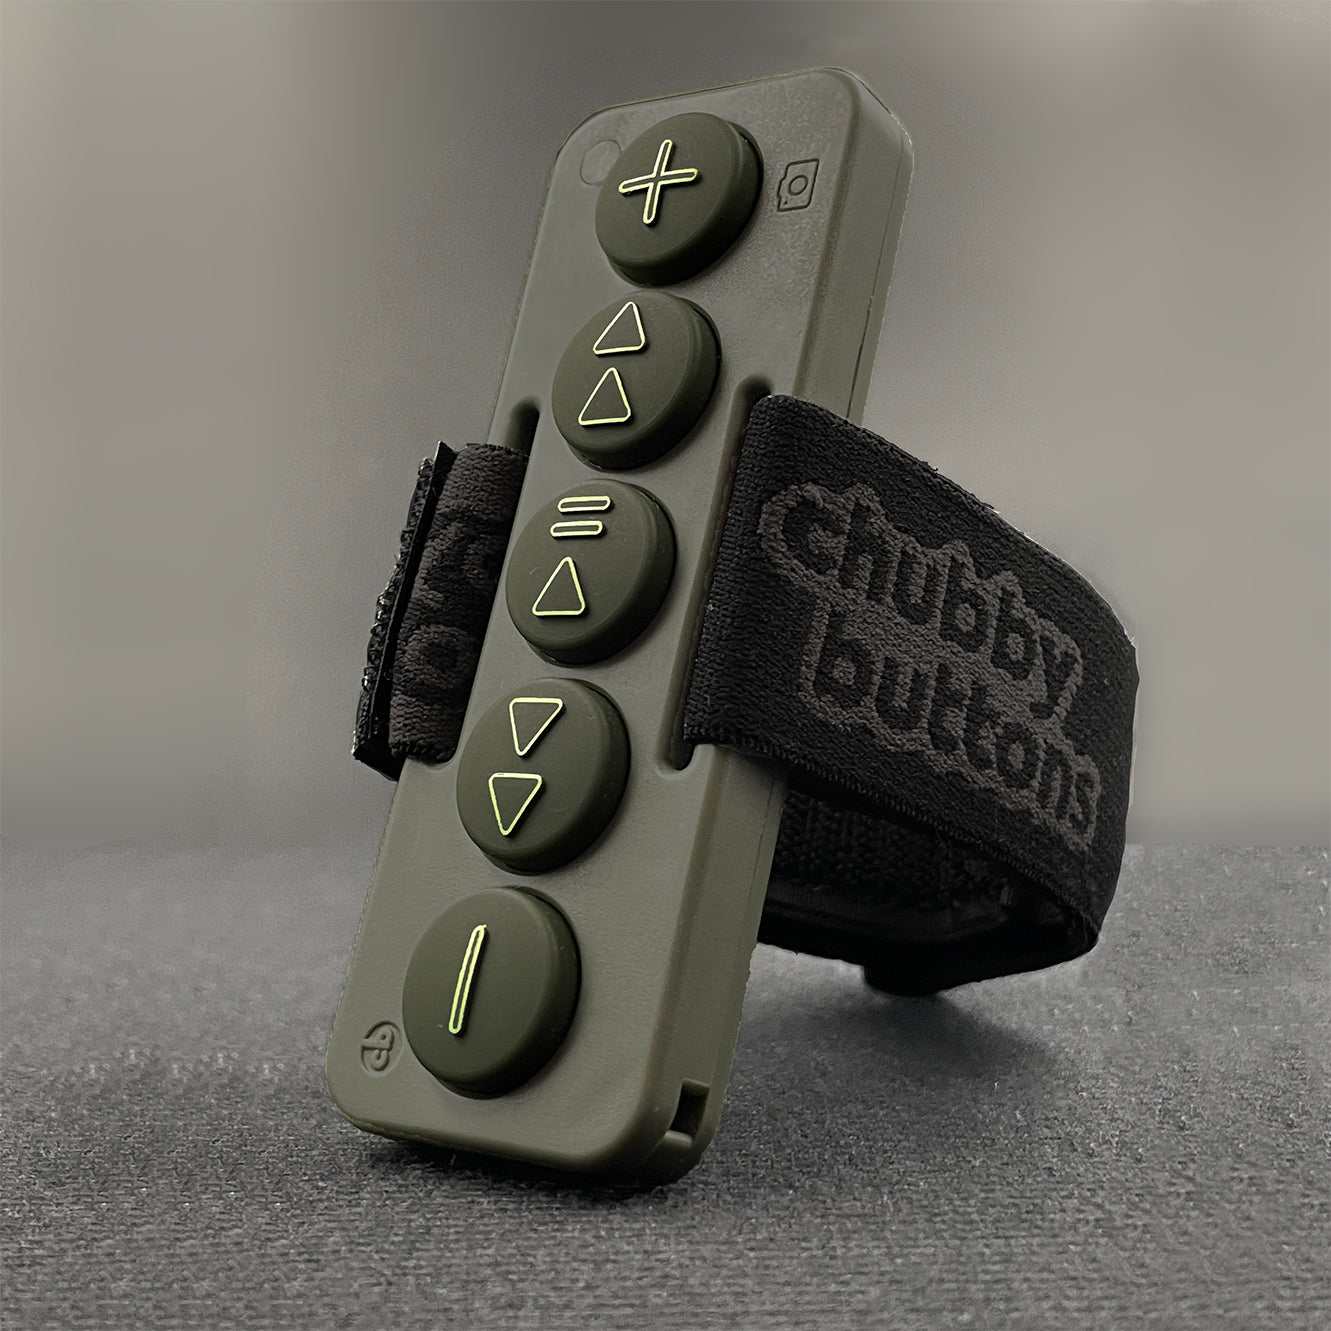 Gouverneur oor vrijdag Chubby Buttons 2: The Wearable/Stickable Bluetooth Remote